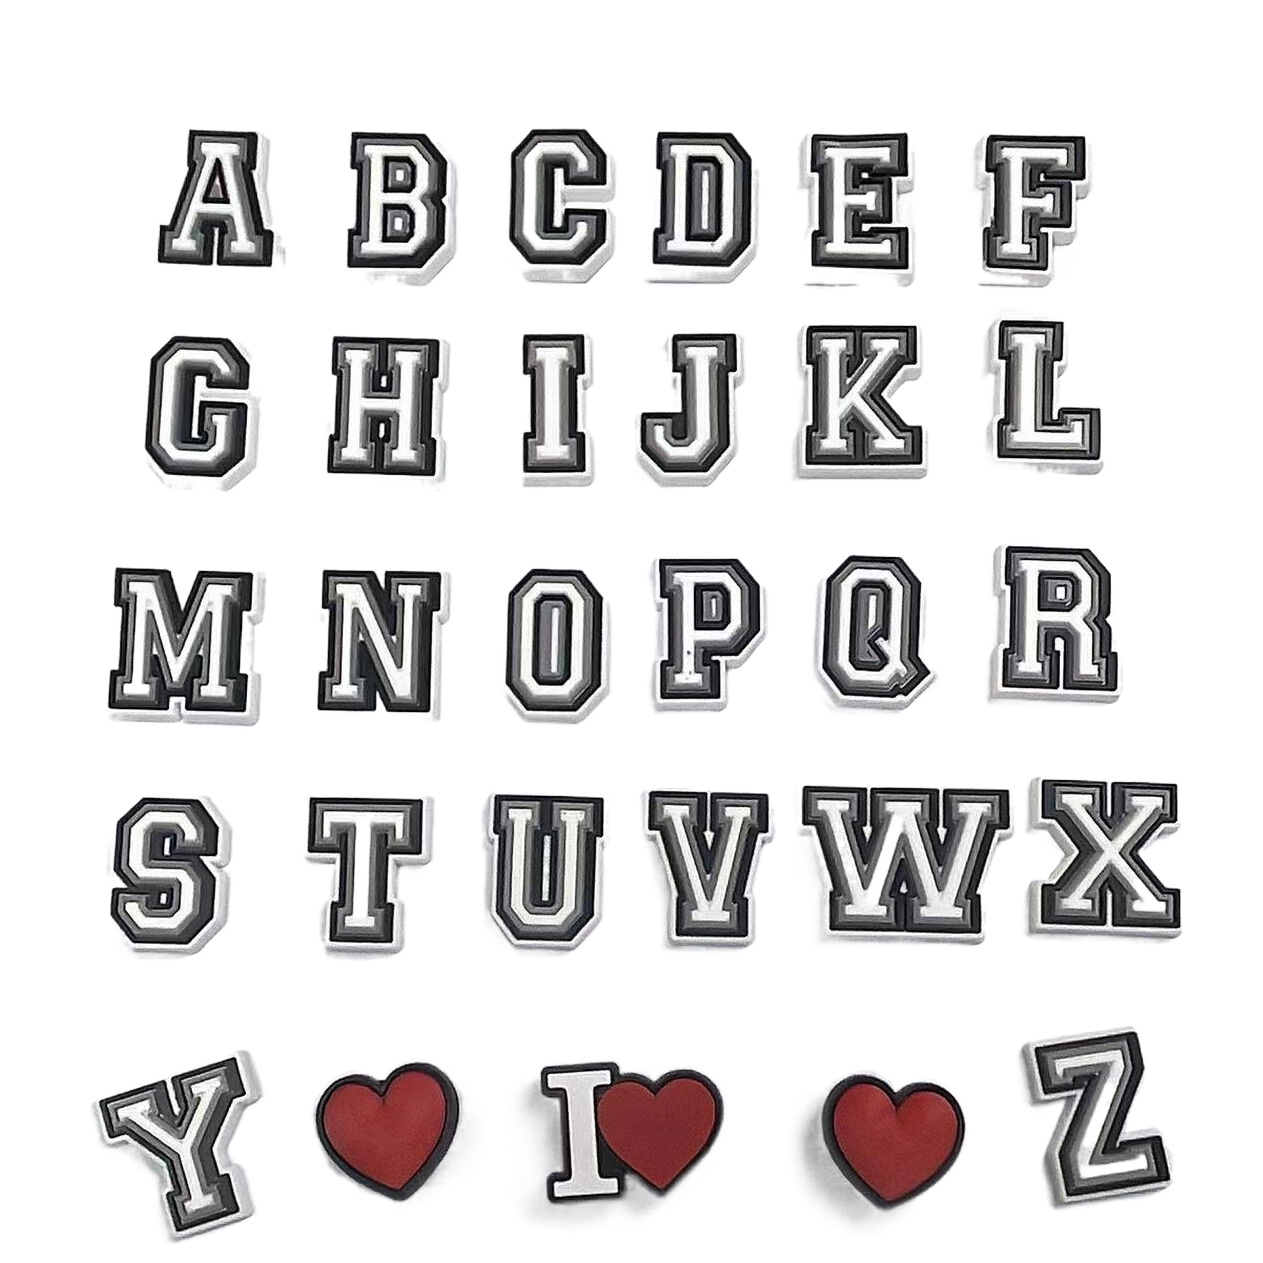 Black and white ash english letter number suit Crocs Shoeshine Buckles PVC Shoes DIY Accessories Cross border goods in stock